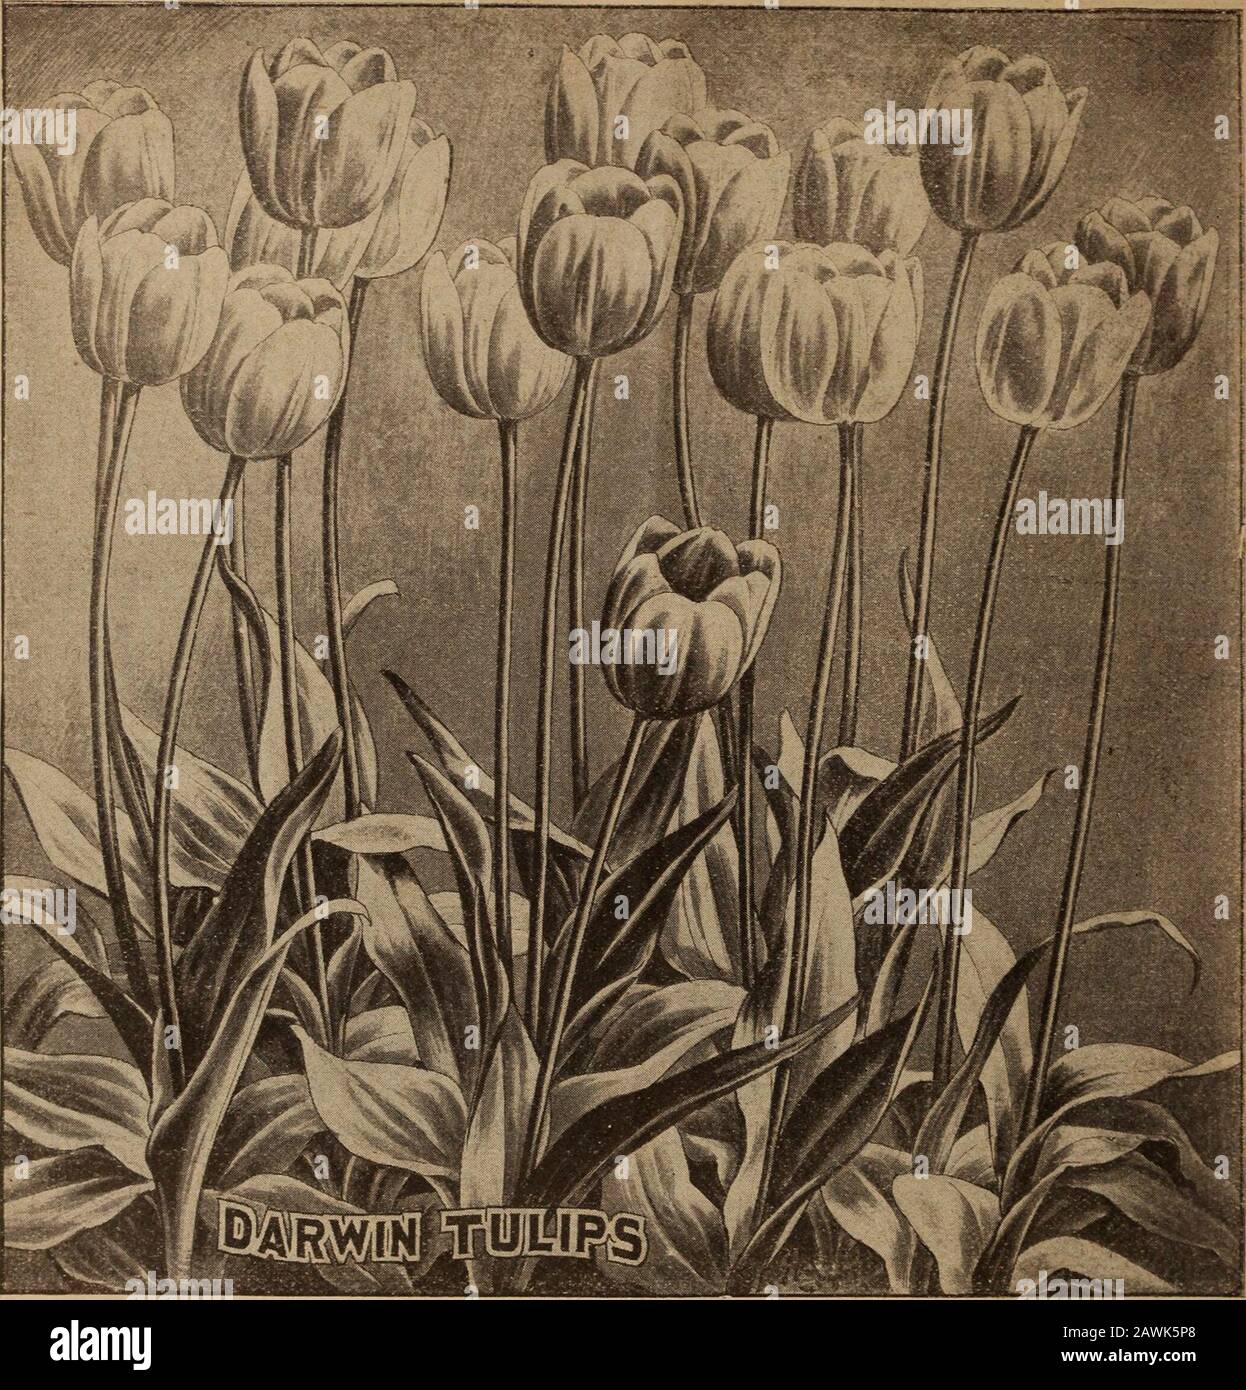 Childs' bulbs that bloom : bulbs that bloom plants that please berries that bear . Mrs. Sarah Starkey. Menomonie. Wis., says: ••Last fall I bought three dozen Tulips and every onehad a bloom on them last spring and they were a beau-tiful sight. 8 John Lewis Childs, Inc., Floral Park,, N. Y.. GLORIOUS DARWIN TULIPS— THE FINEST SORTS A new pace of Tulips of wonderful form and grandeur,bome on stems three to four feet high. The colors areexceedingly rich and varied, panging through all theshades of rose, deep red, violet, purple-blues to coal-blaCfc Darwins are the most stately of Tulips* a bed o Stock Photo